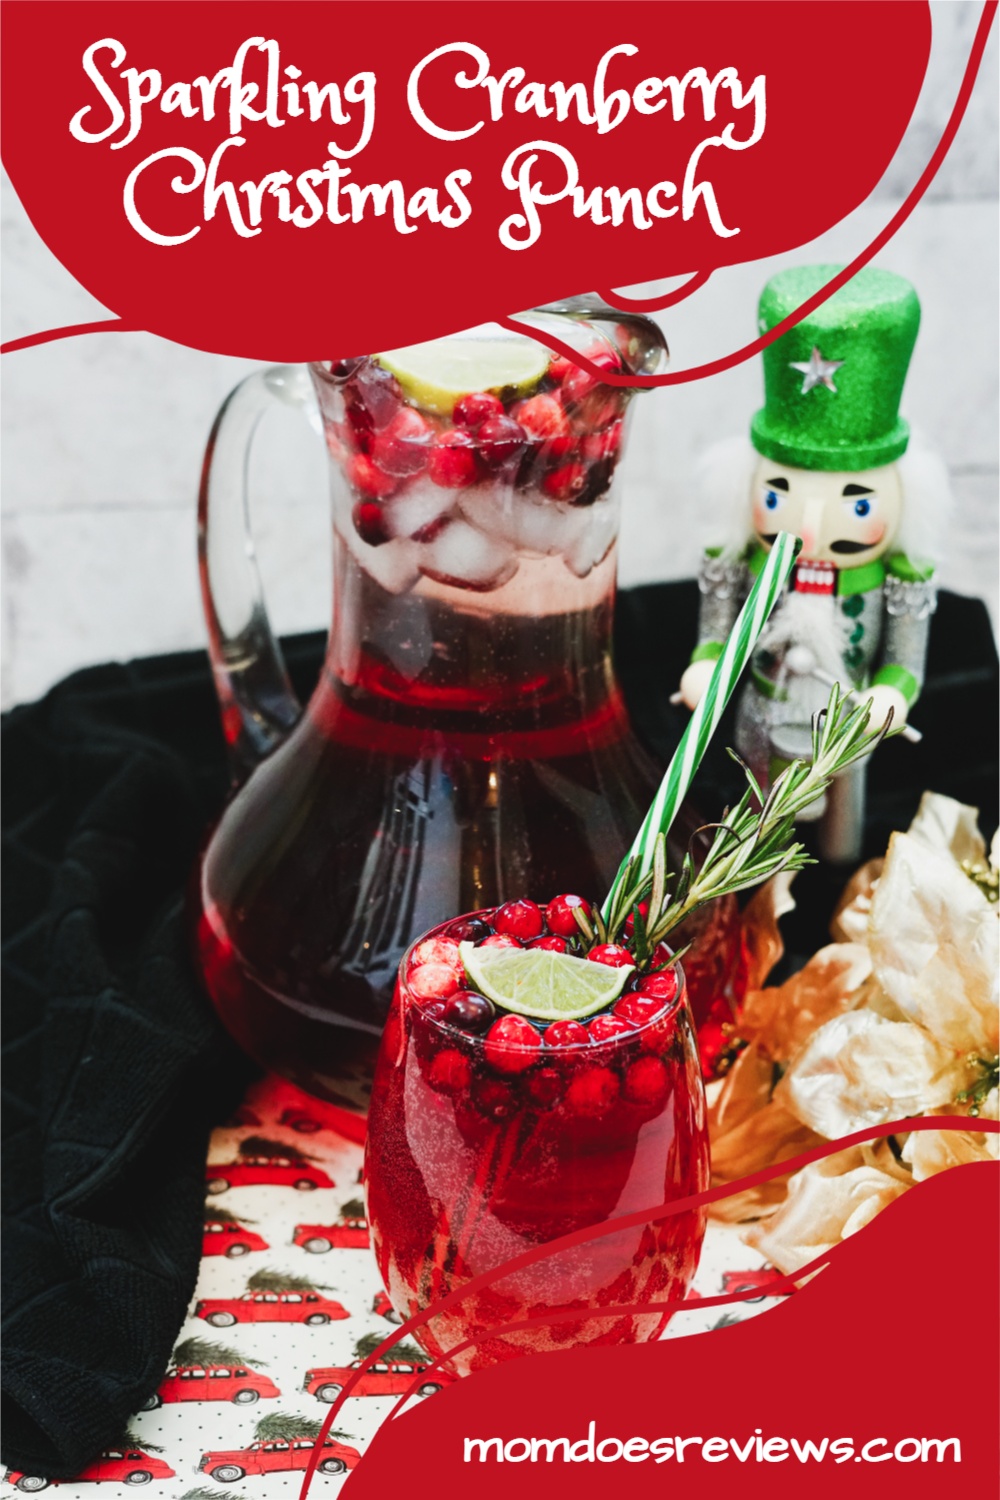 Sparkling Cranberry Christmas Punch